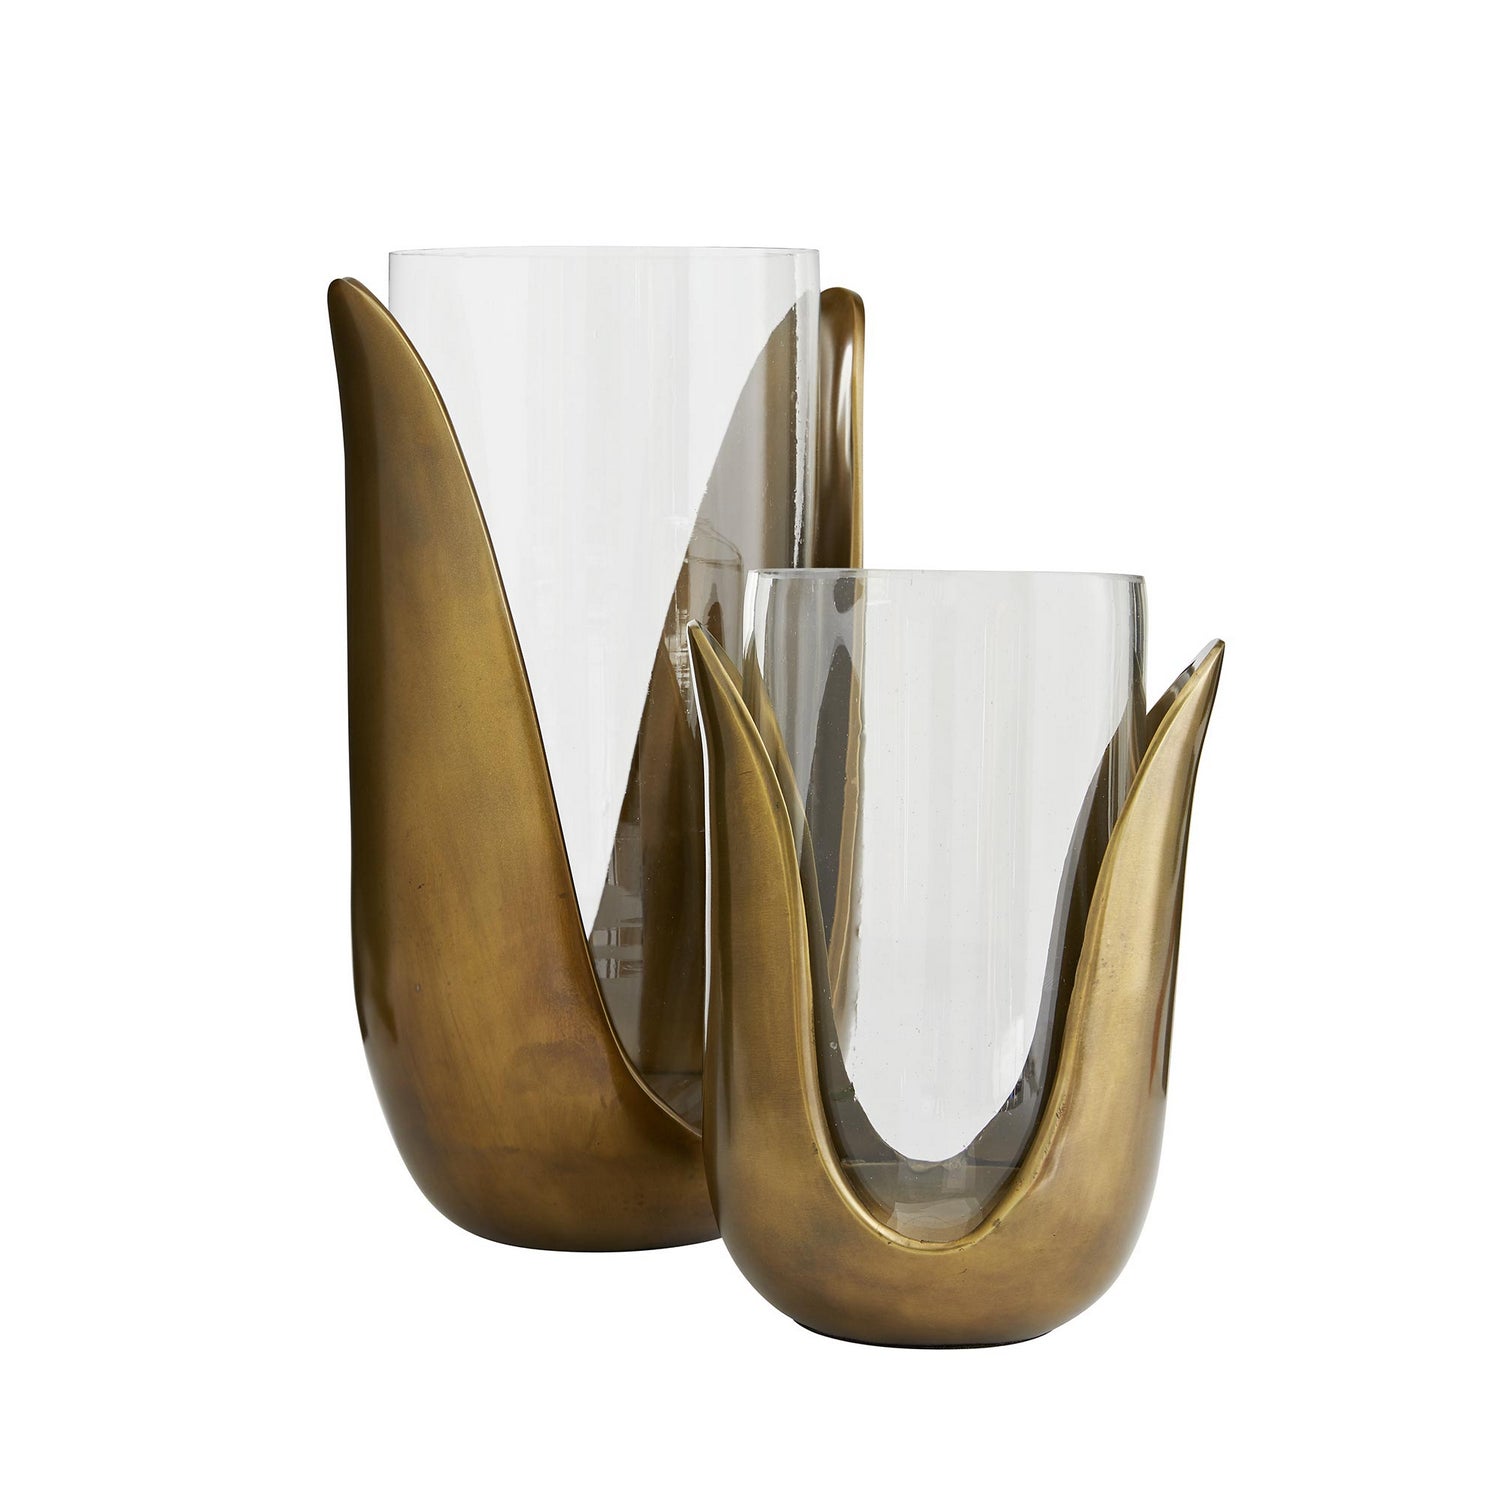 Vases, Set of 2 from the Sonia collection in Antique Brass finish